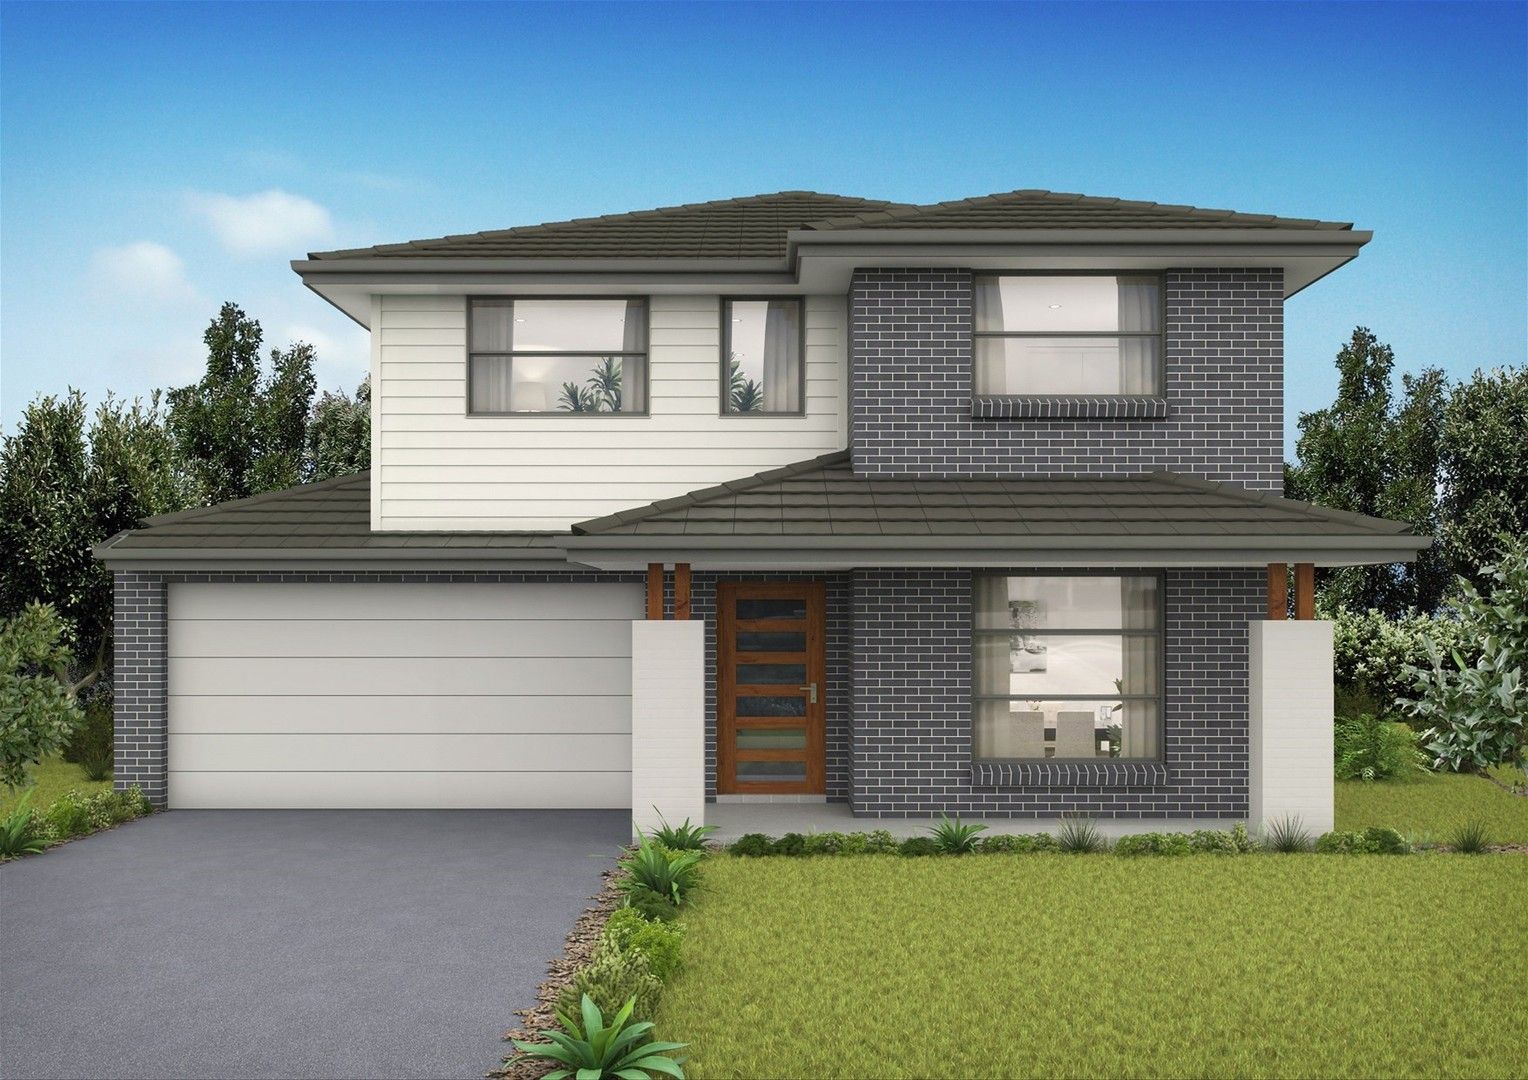 4 bedrooms New House & Land in Address on request Address on request DENHAM COURT NSW, 2565